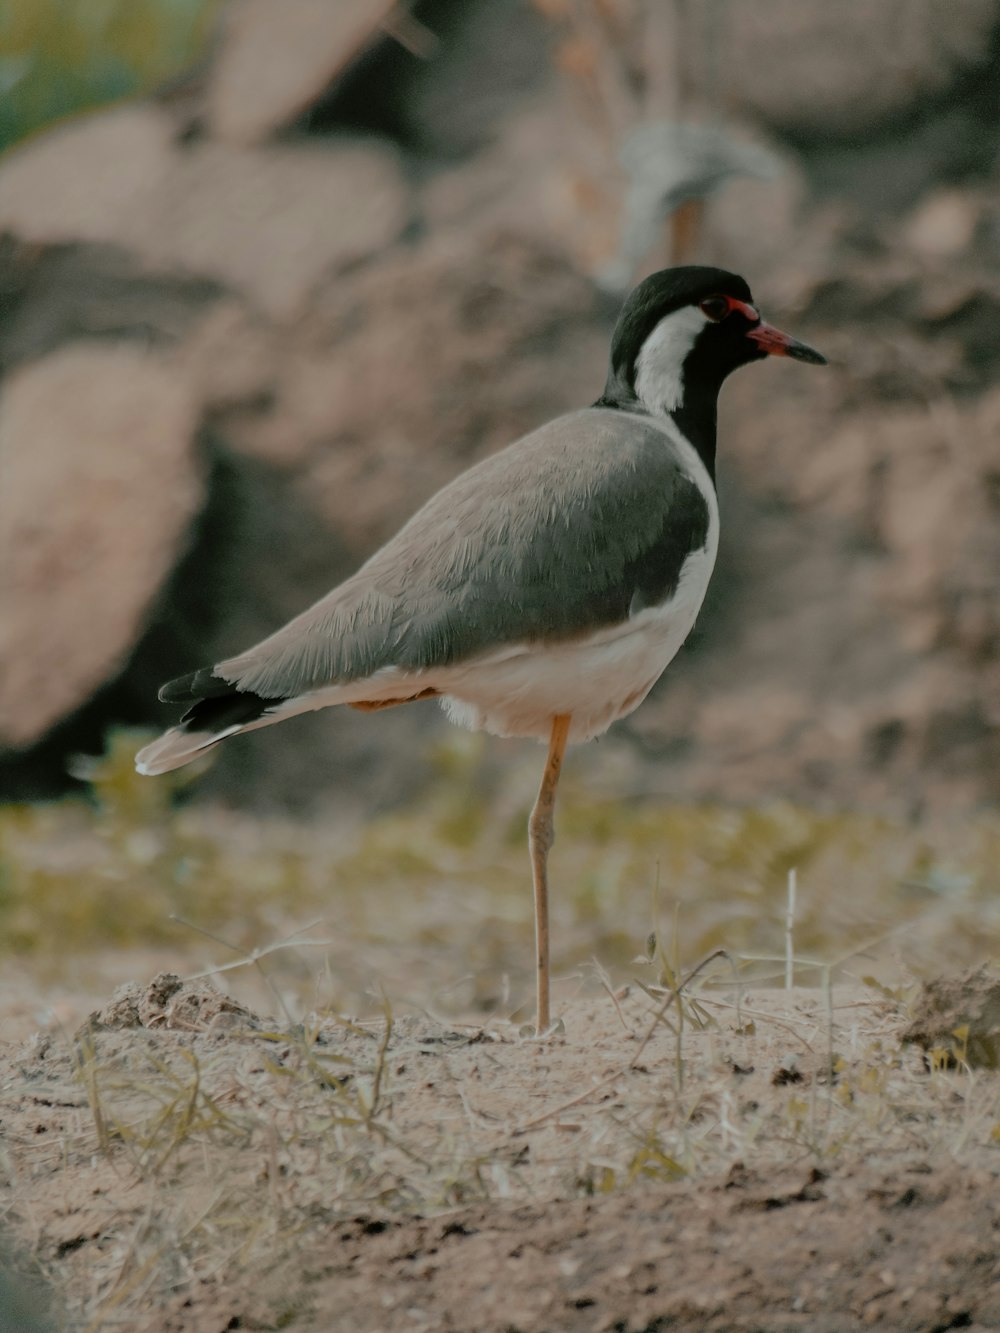 a bird is standing on the ground near some rocks